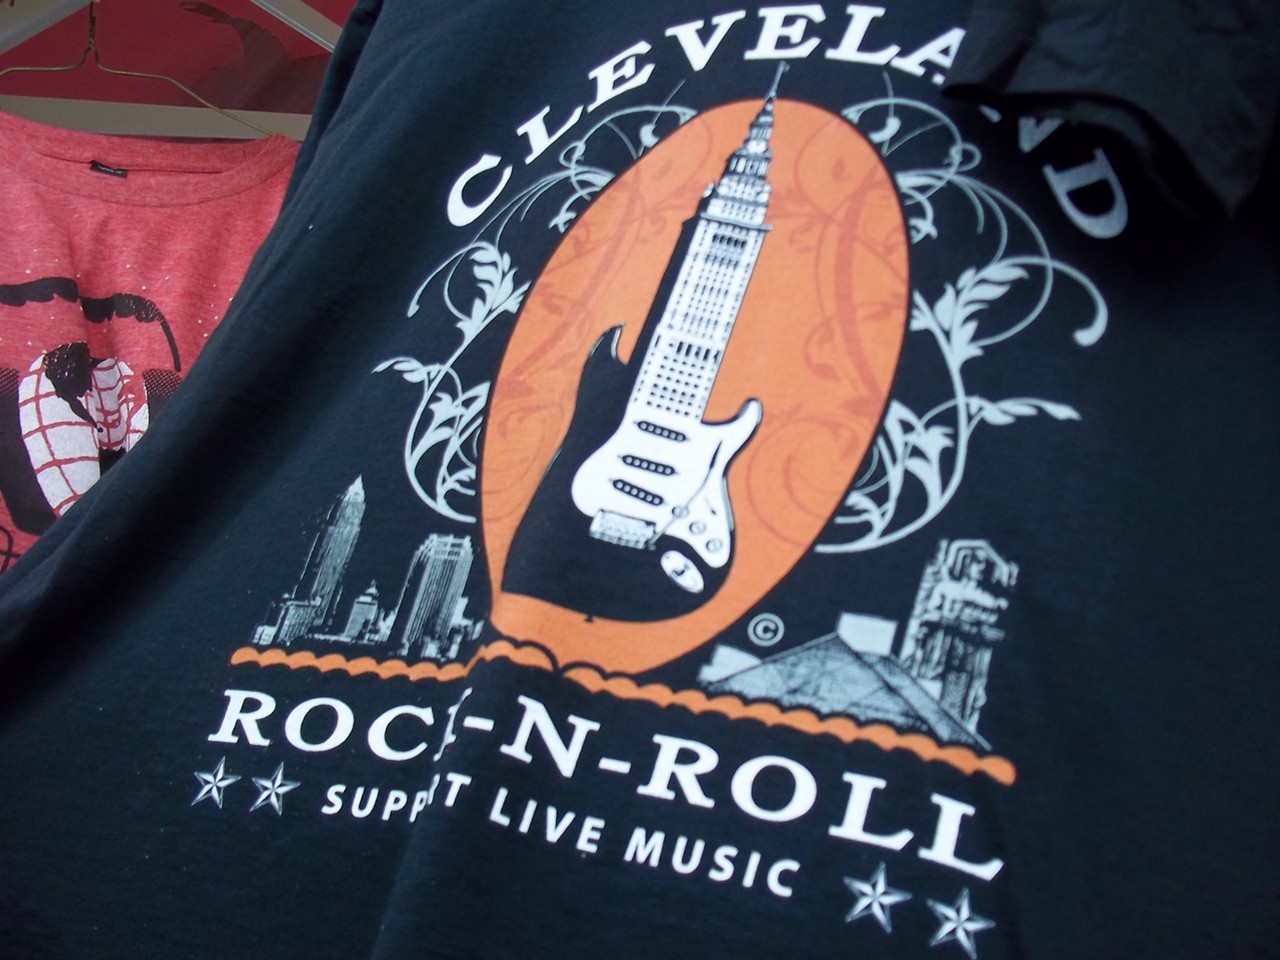 Scenes from Cleveland's Rock City Festival